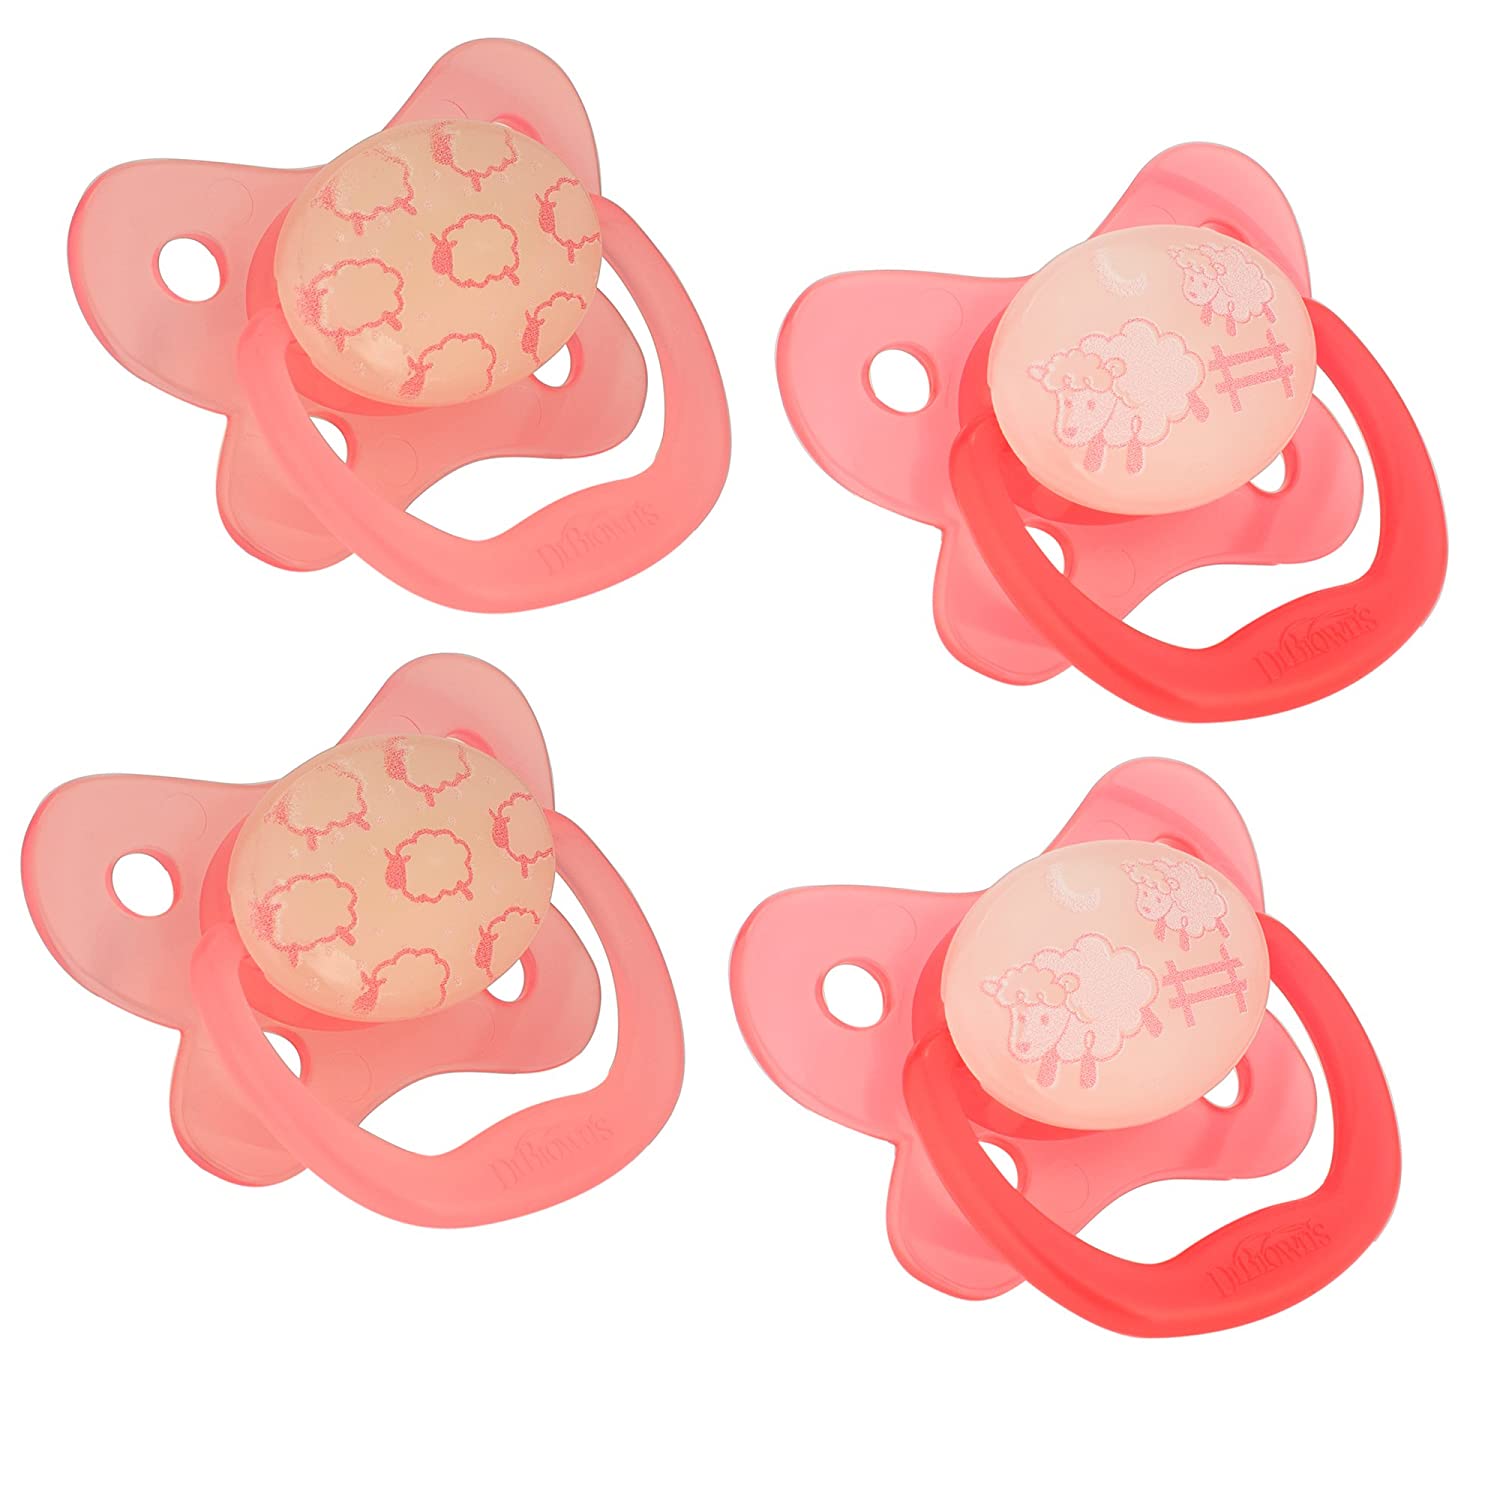 Dr Brown PreVent Contour Glow in the Dark Pacifier